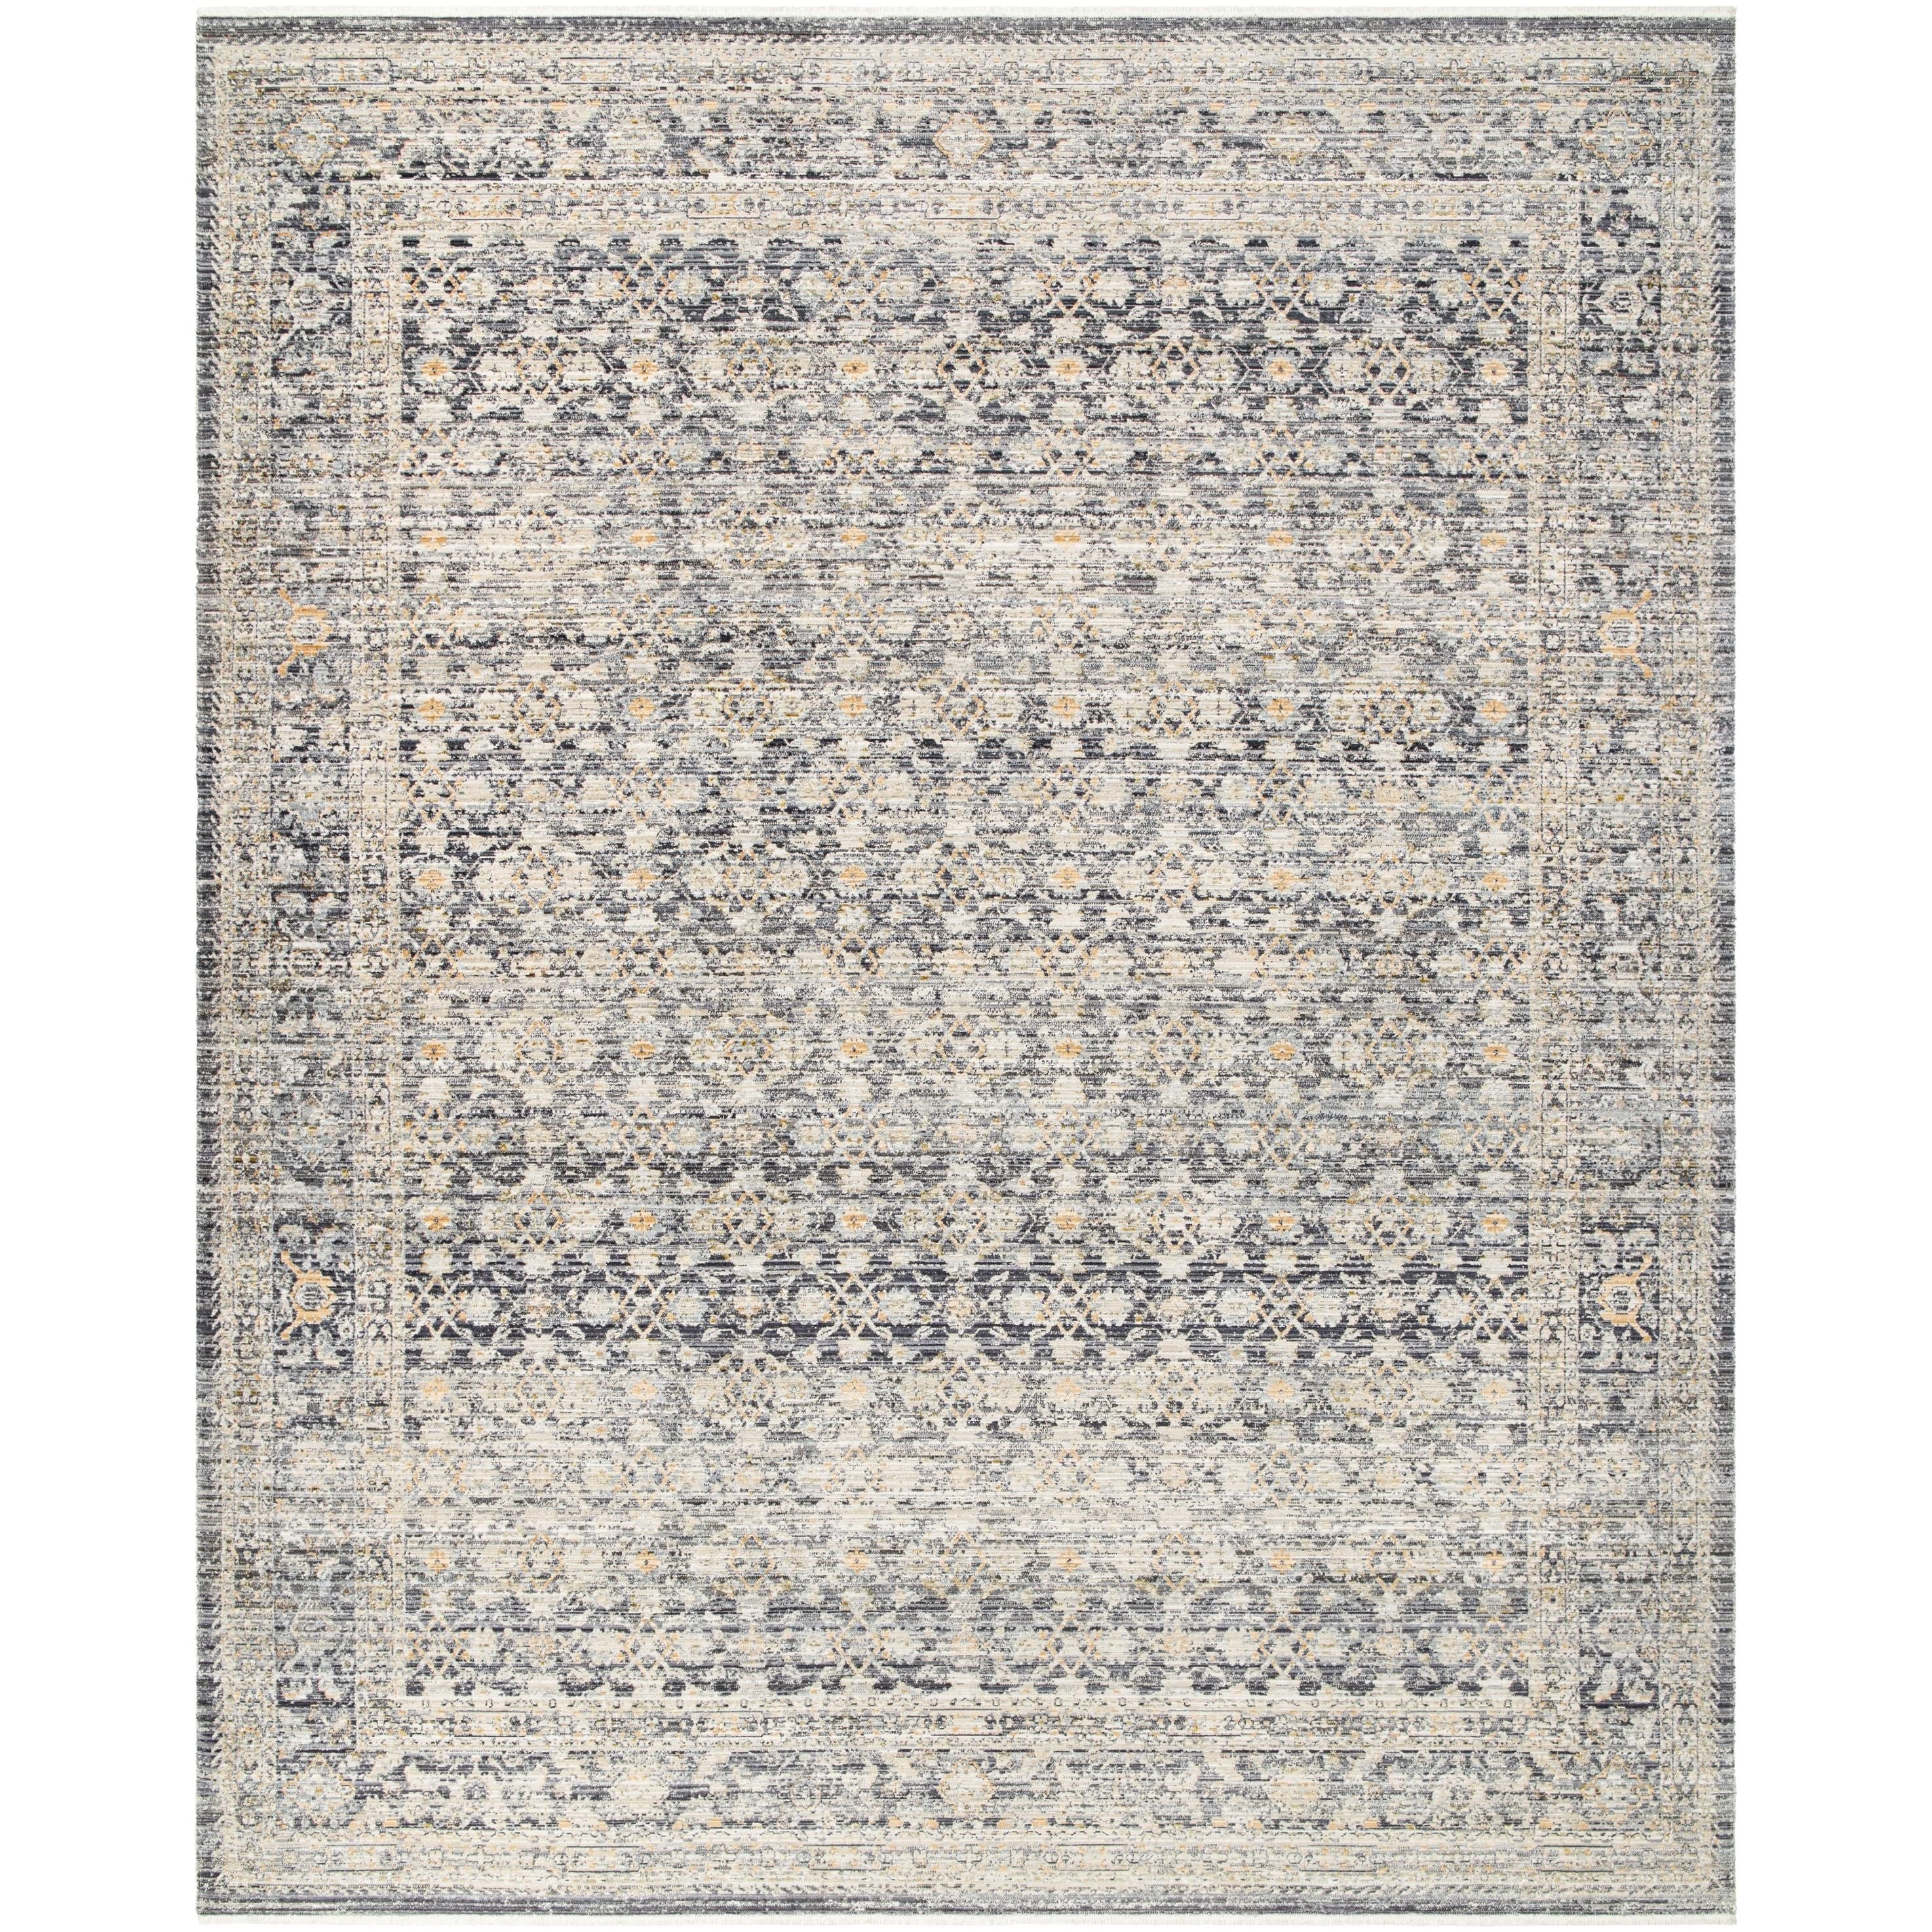 Introducing the Margaret area rug, the perfect combination of timeless style and modern sophistication! This unique rug from our Becki Owens x Surya collaboration features a distressed vintage design that is sure to bring a cozy, inviting atmosphere to any space. Amethyst Home provides interior design, new home construction design consulting, vintage area rugs, and lighting in the Washington metro area.